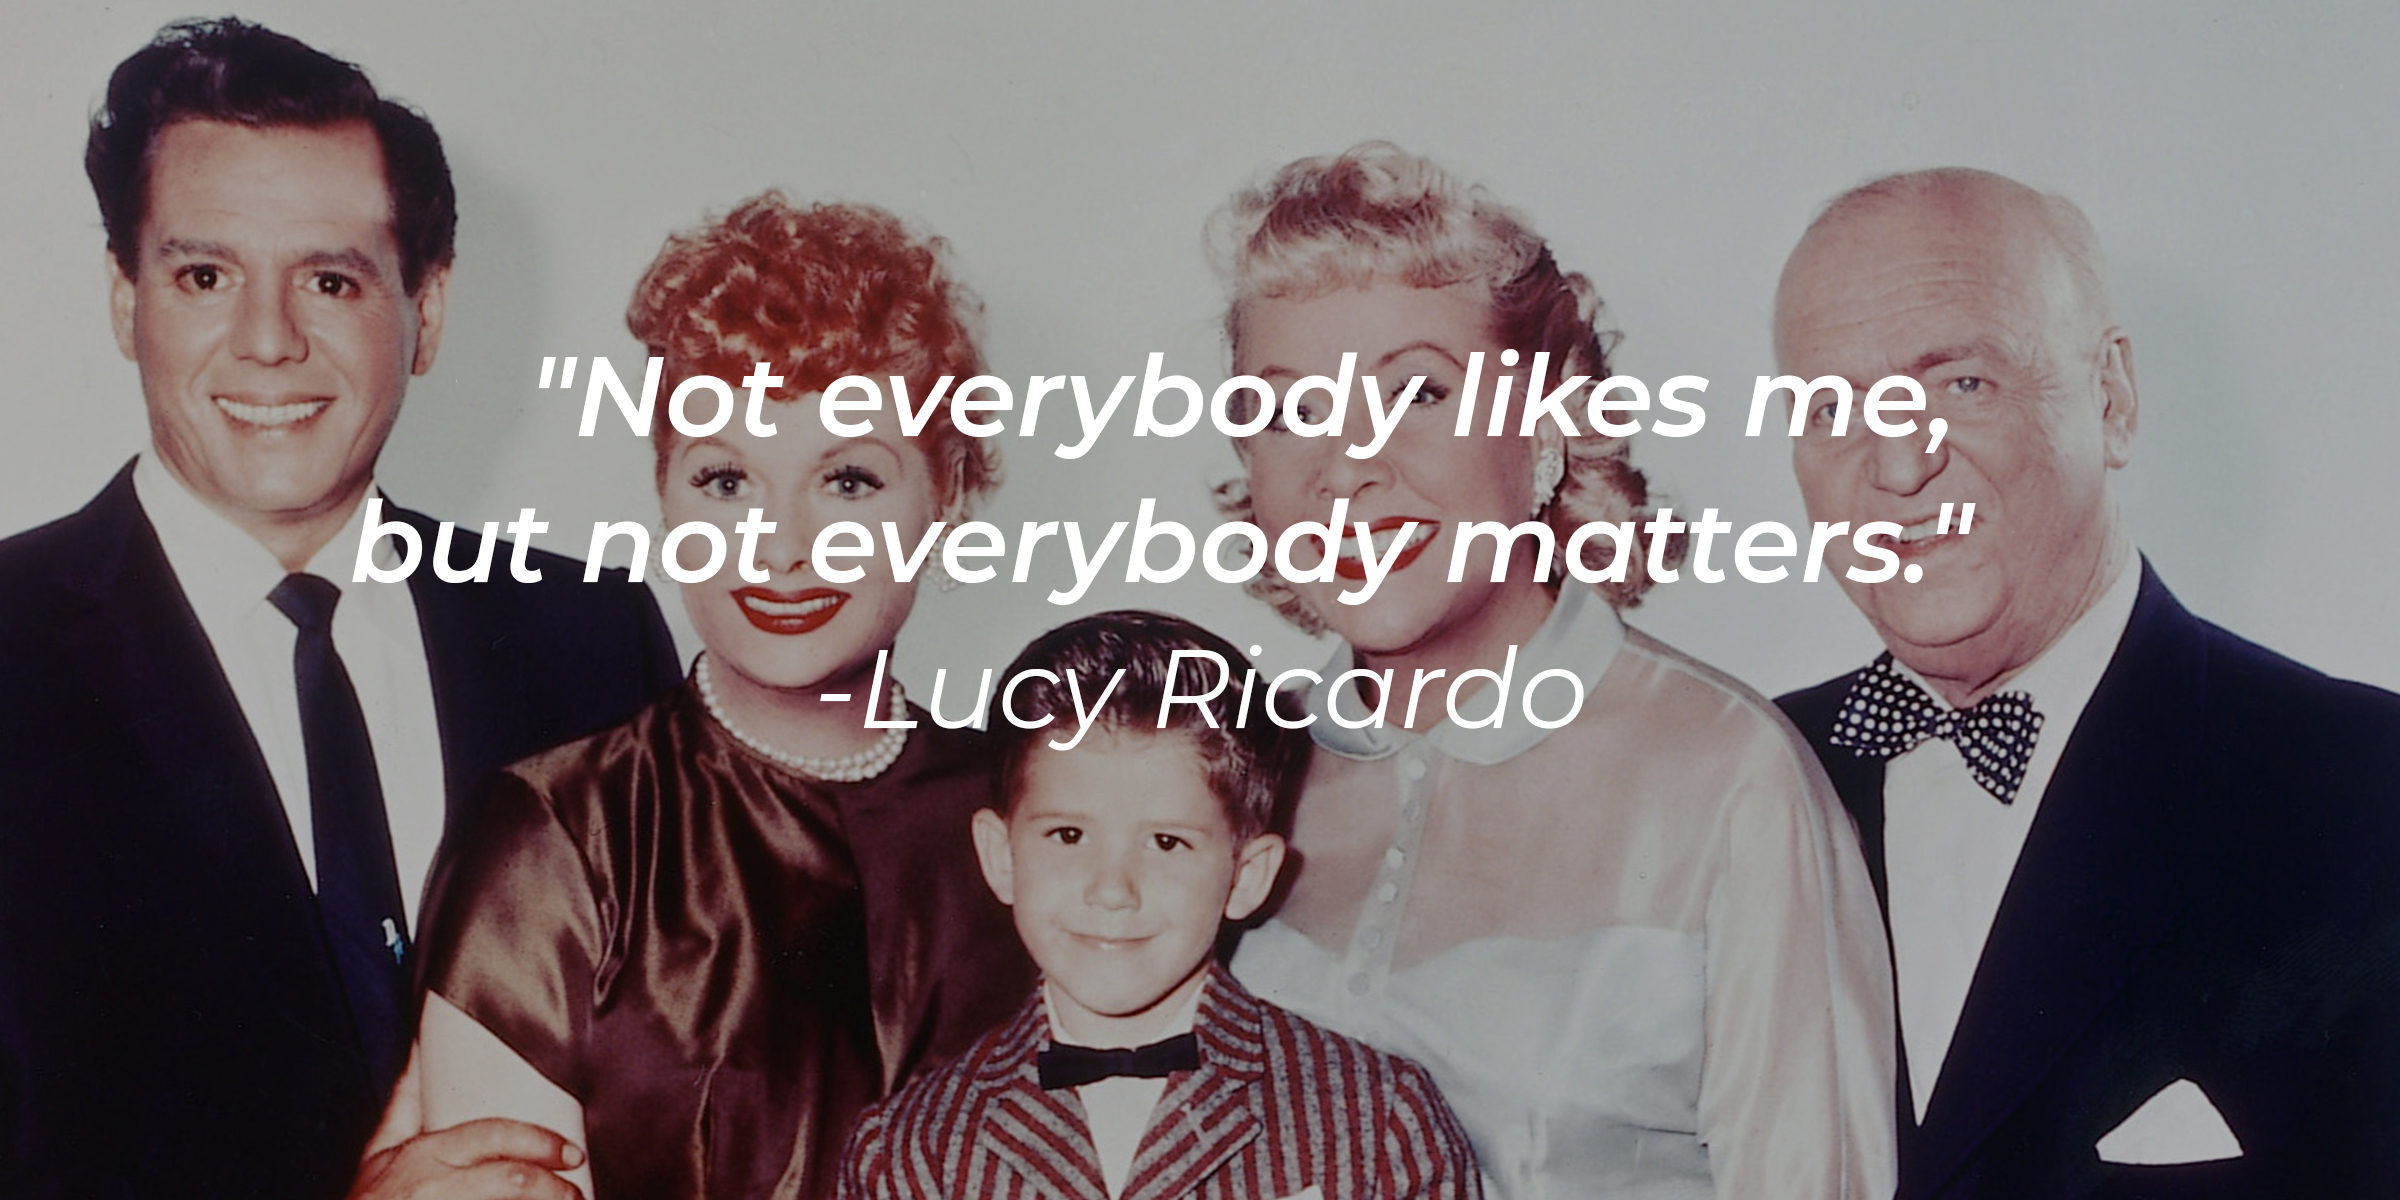 Lucy Ricardo's quote: "Not everybody likes me, but not everybody matters." | Source: Getty Images